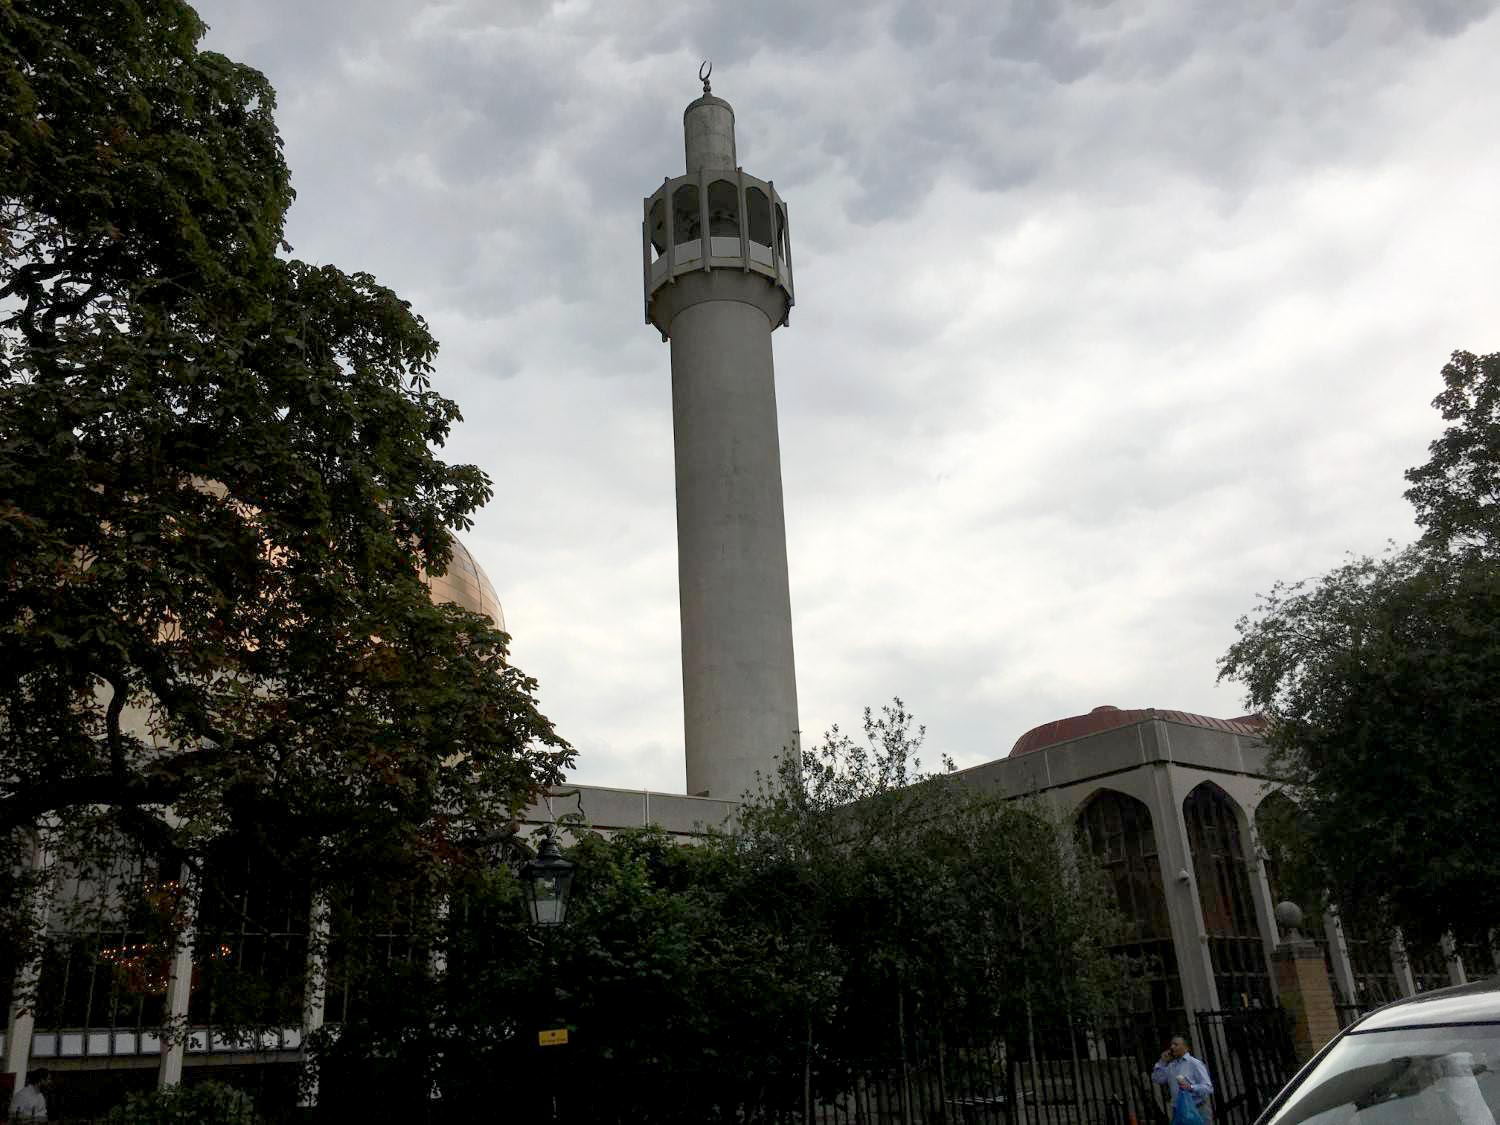 Upward view of the minaret from the street